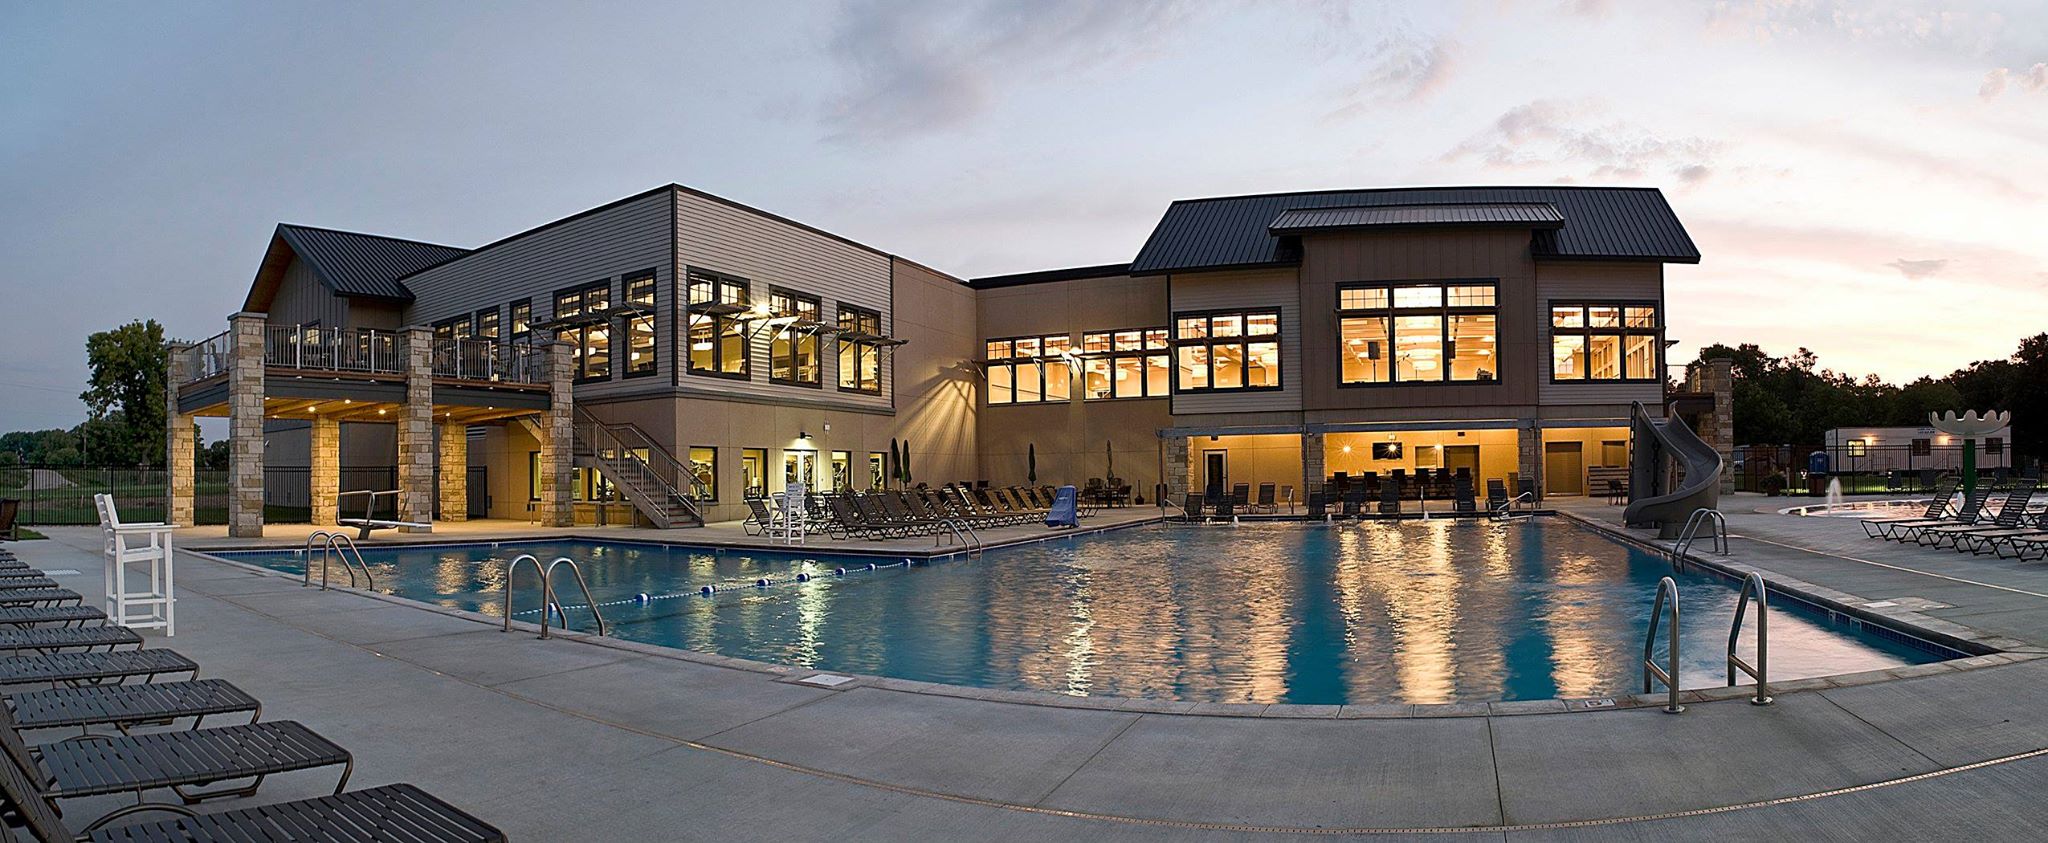 Image of the pool of the Country Club of Sioux Falls